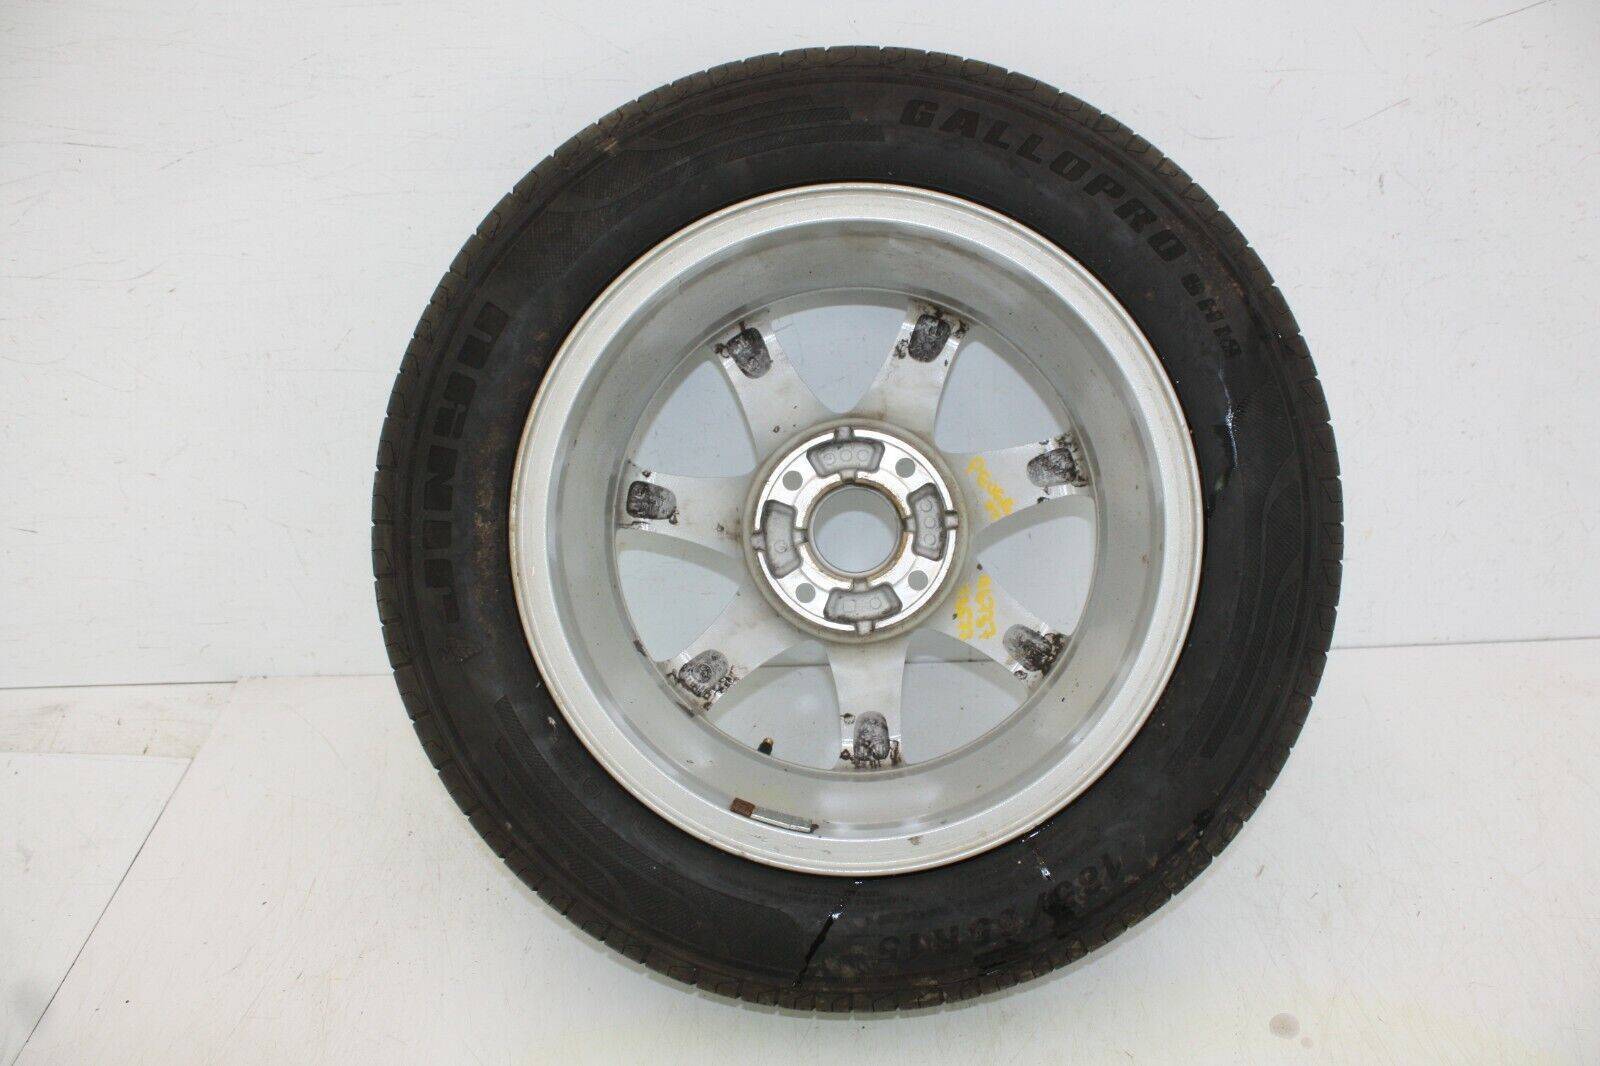 Peugeot-208-15-Inch-Alloy-Wheel-with-Tyre-9673773577-Genuine-175458680937-9